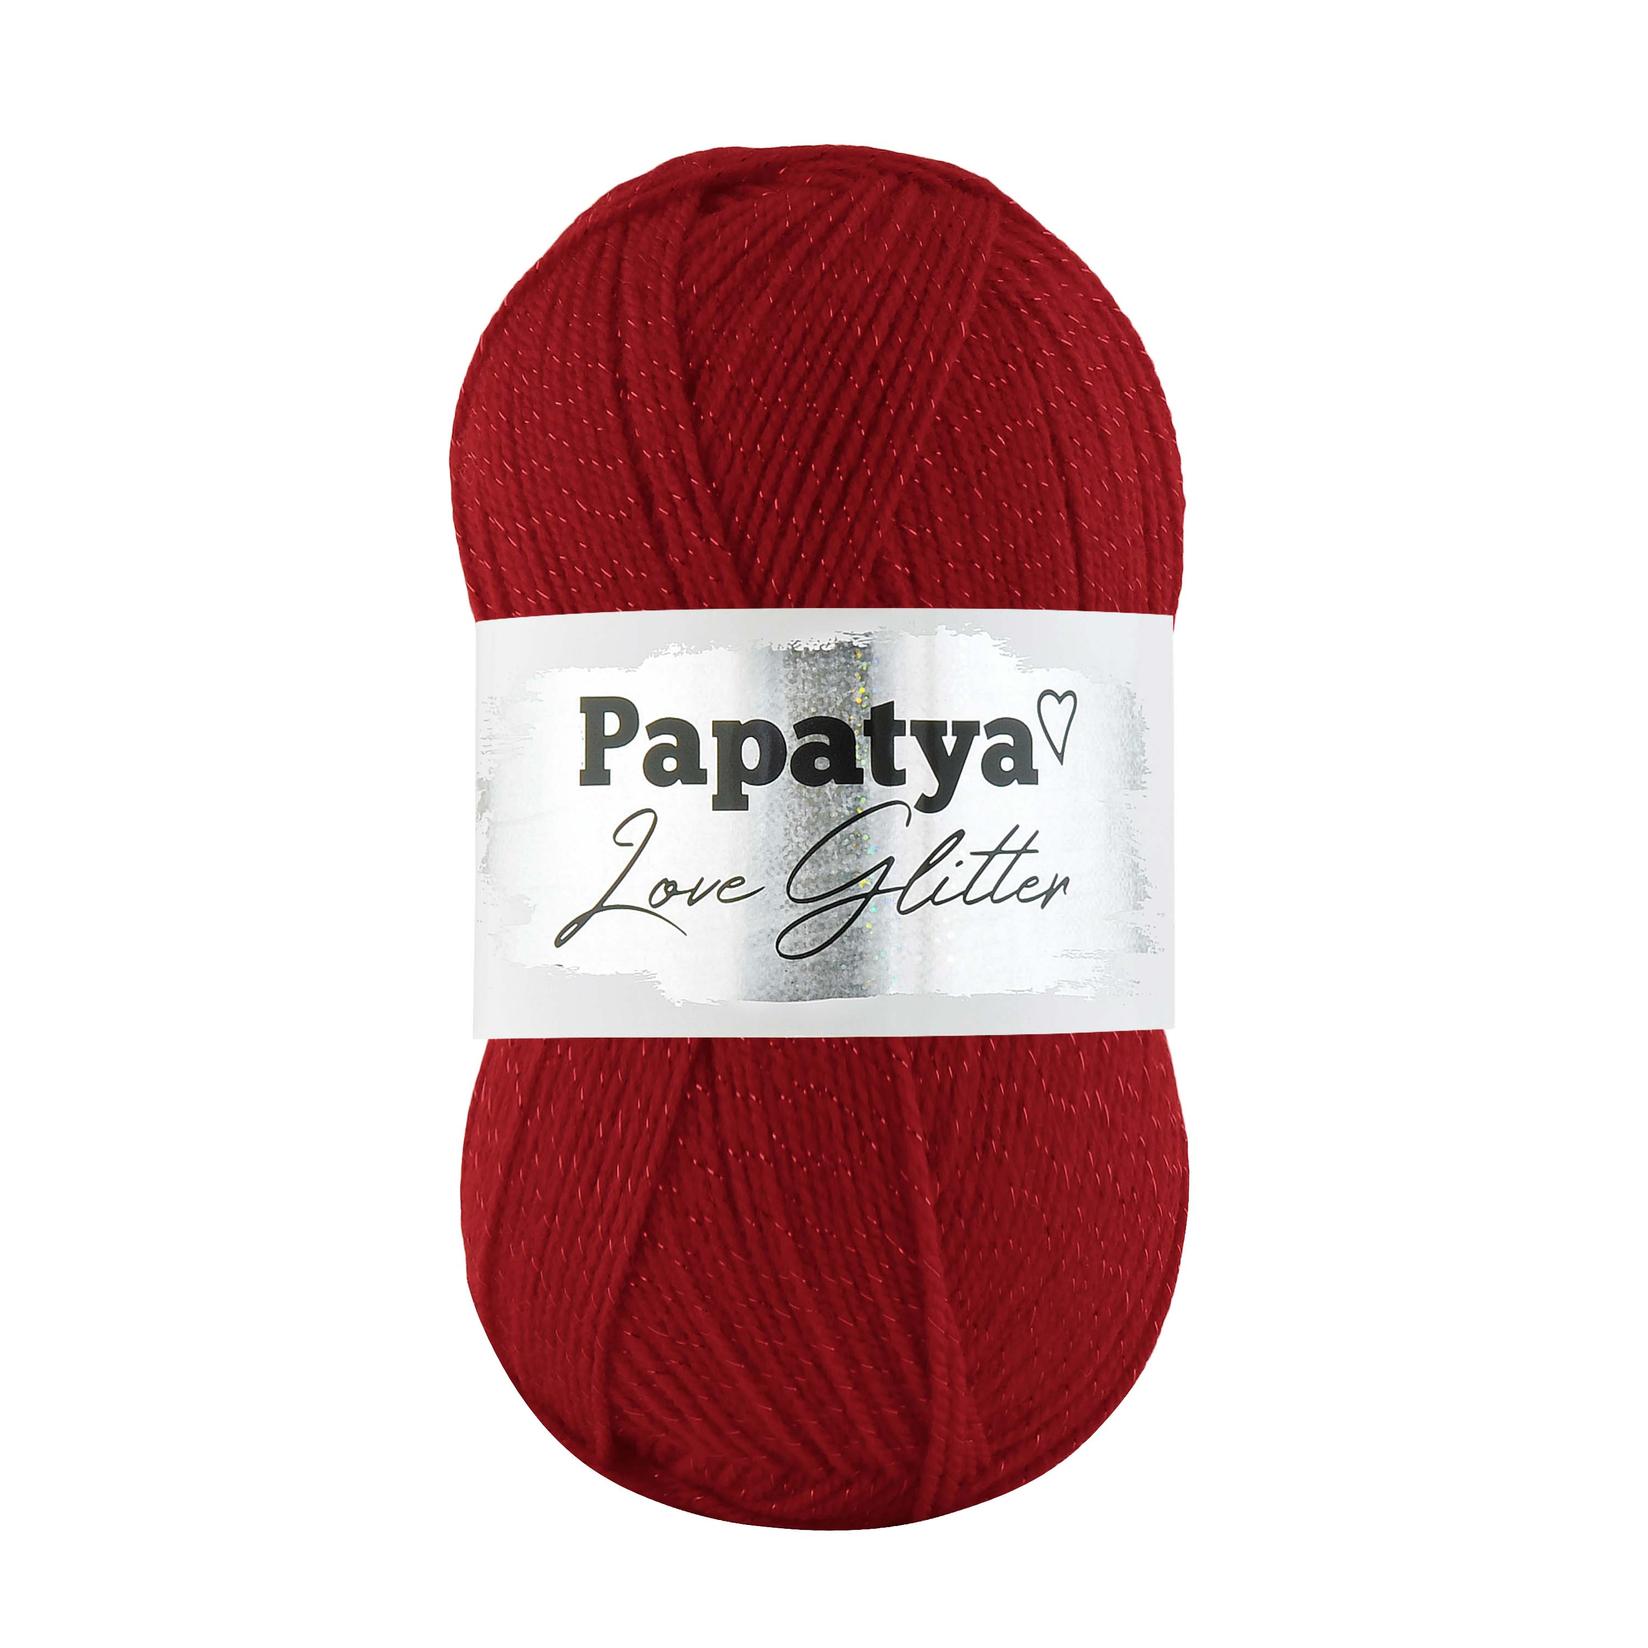 Selected image for PAPATYA Vunica Love Glitter 3080